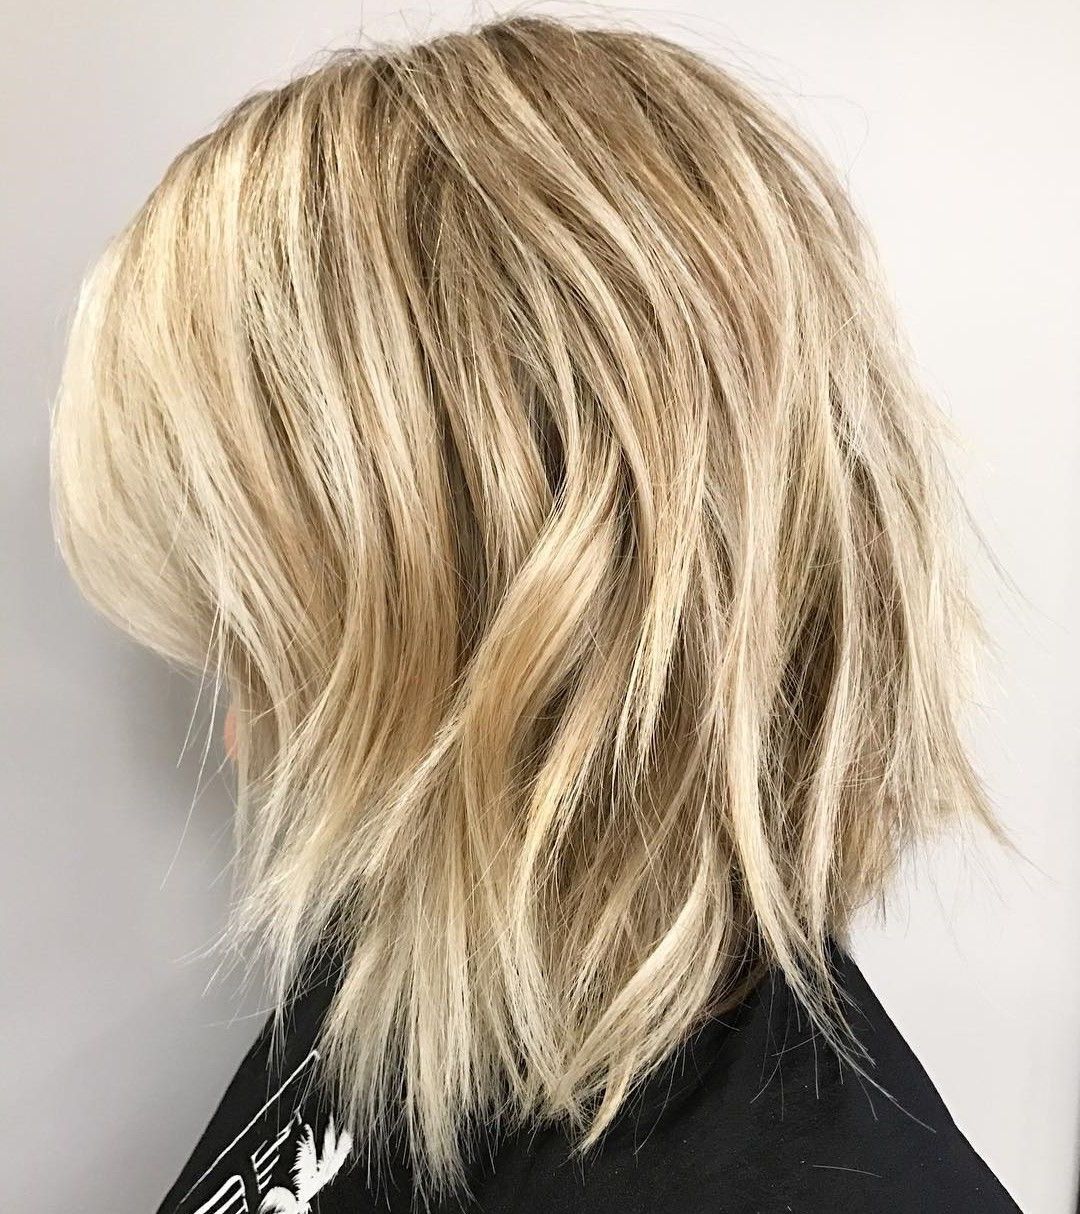 60 Best Variations Of A Medium Shag Haircut For Your Throughout Most Recent Blonde Lob Hairstyles With Disconnected Jagged Layers (View 1 of 20)